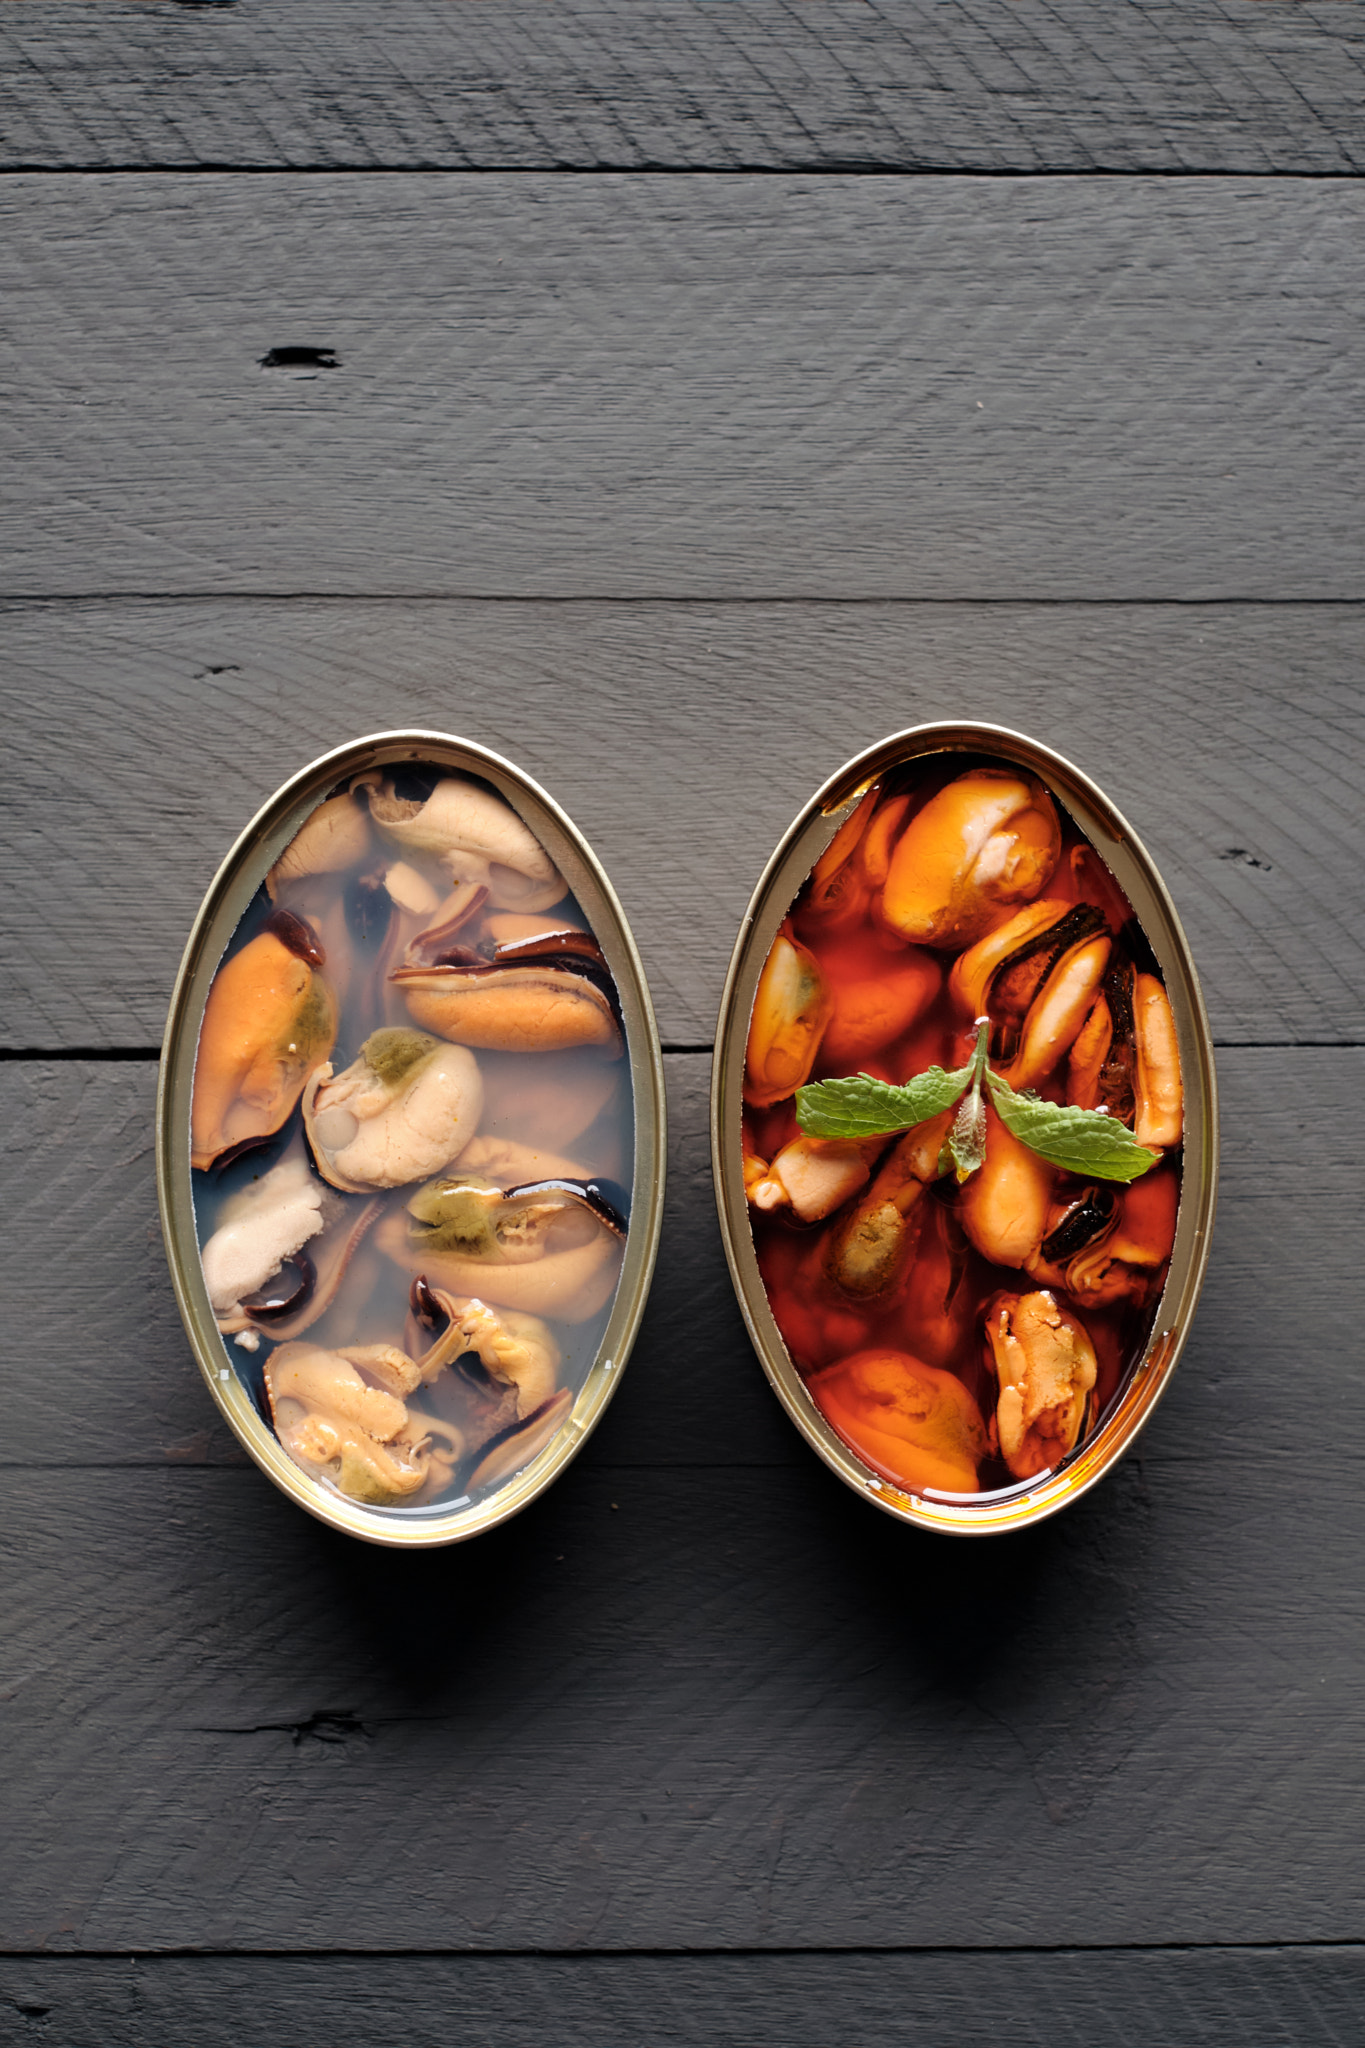 Two cans of mussels